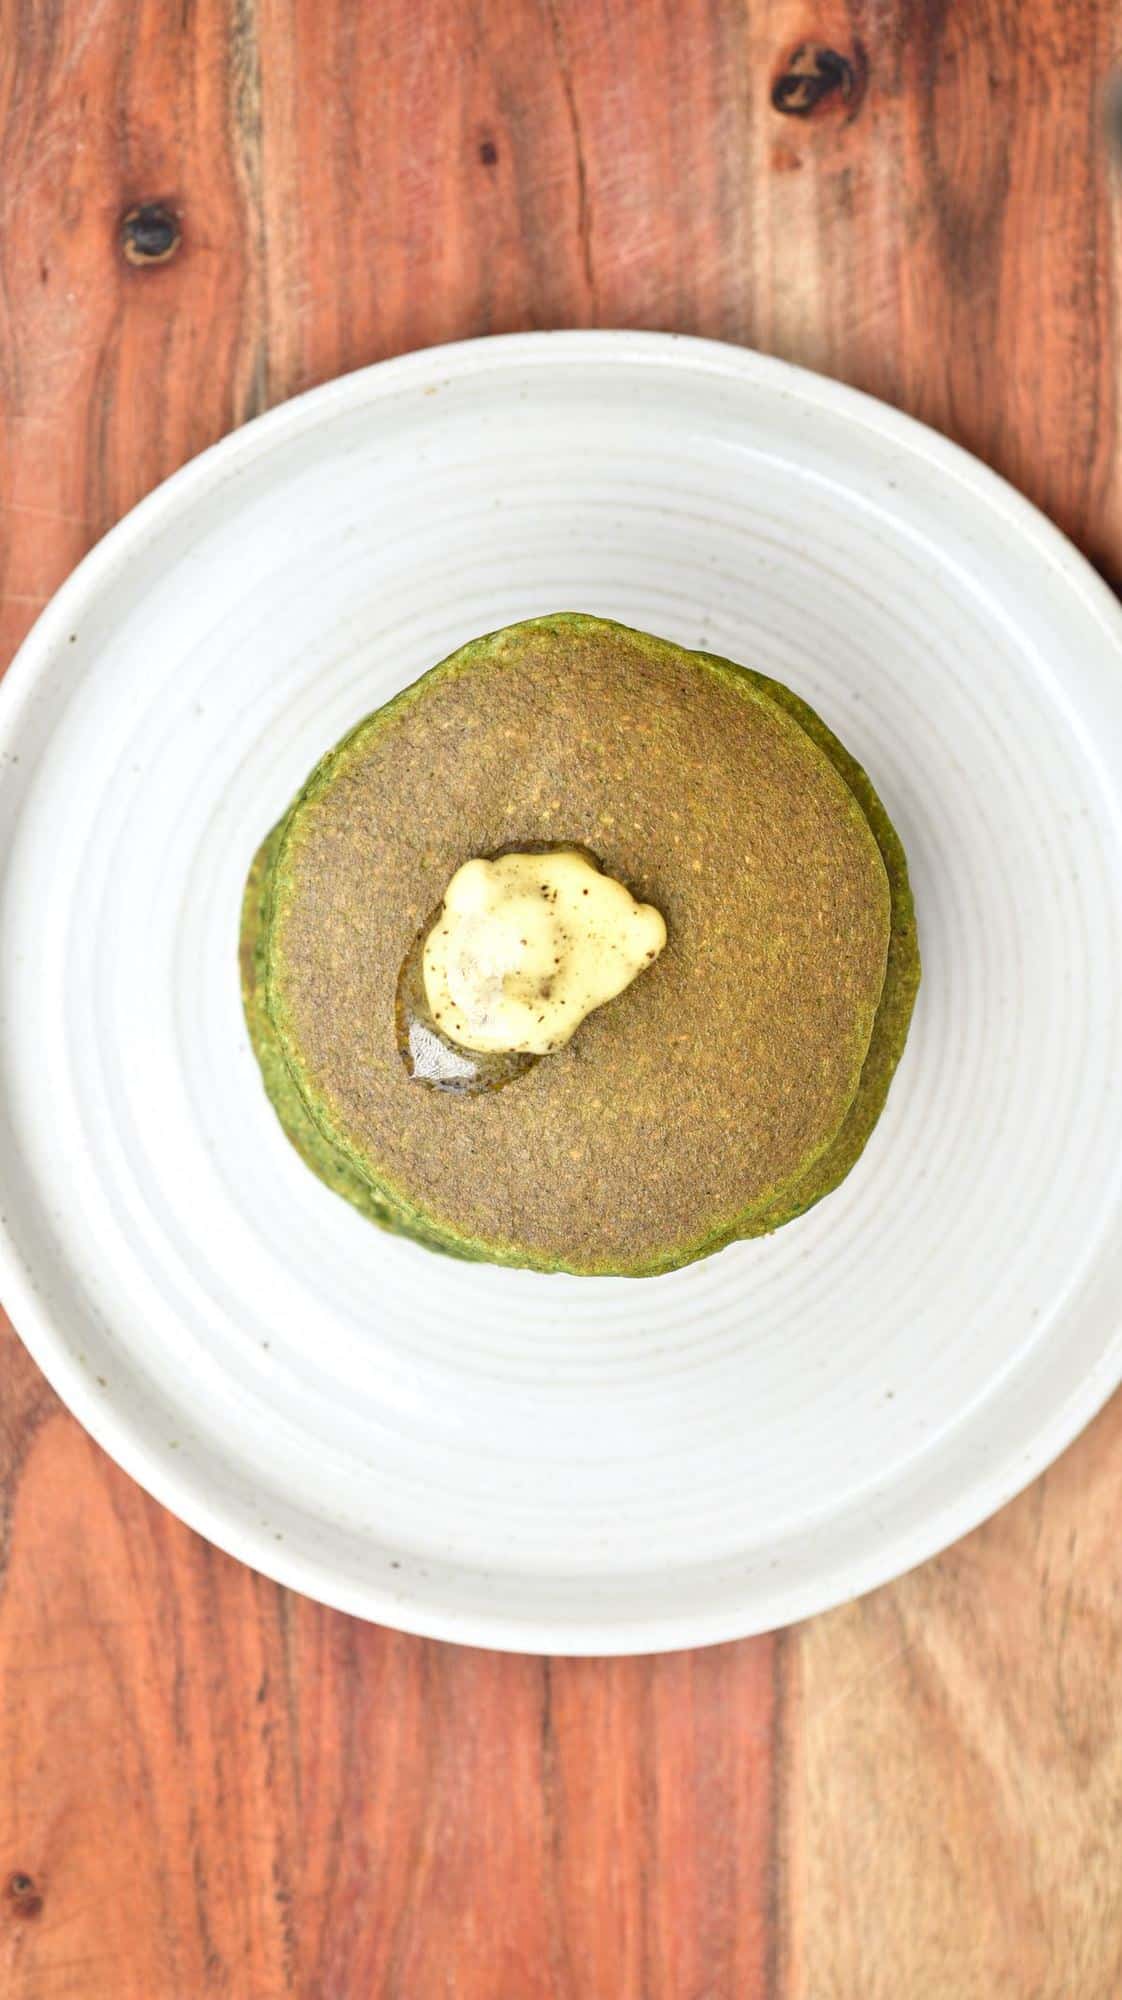 Green pancake with vanilla butter on top